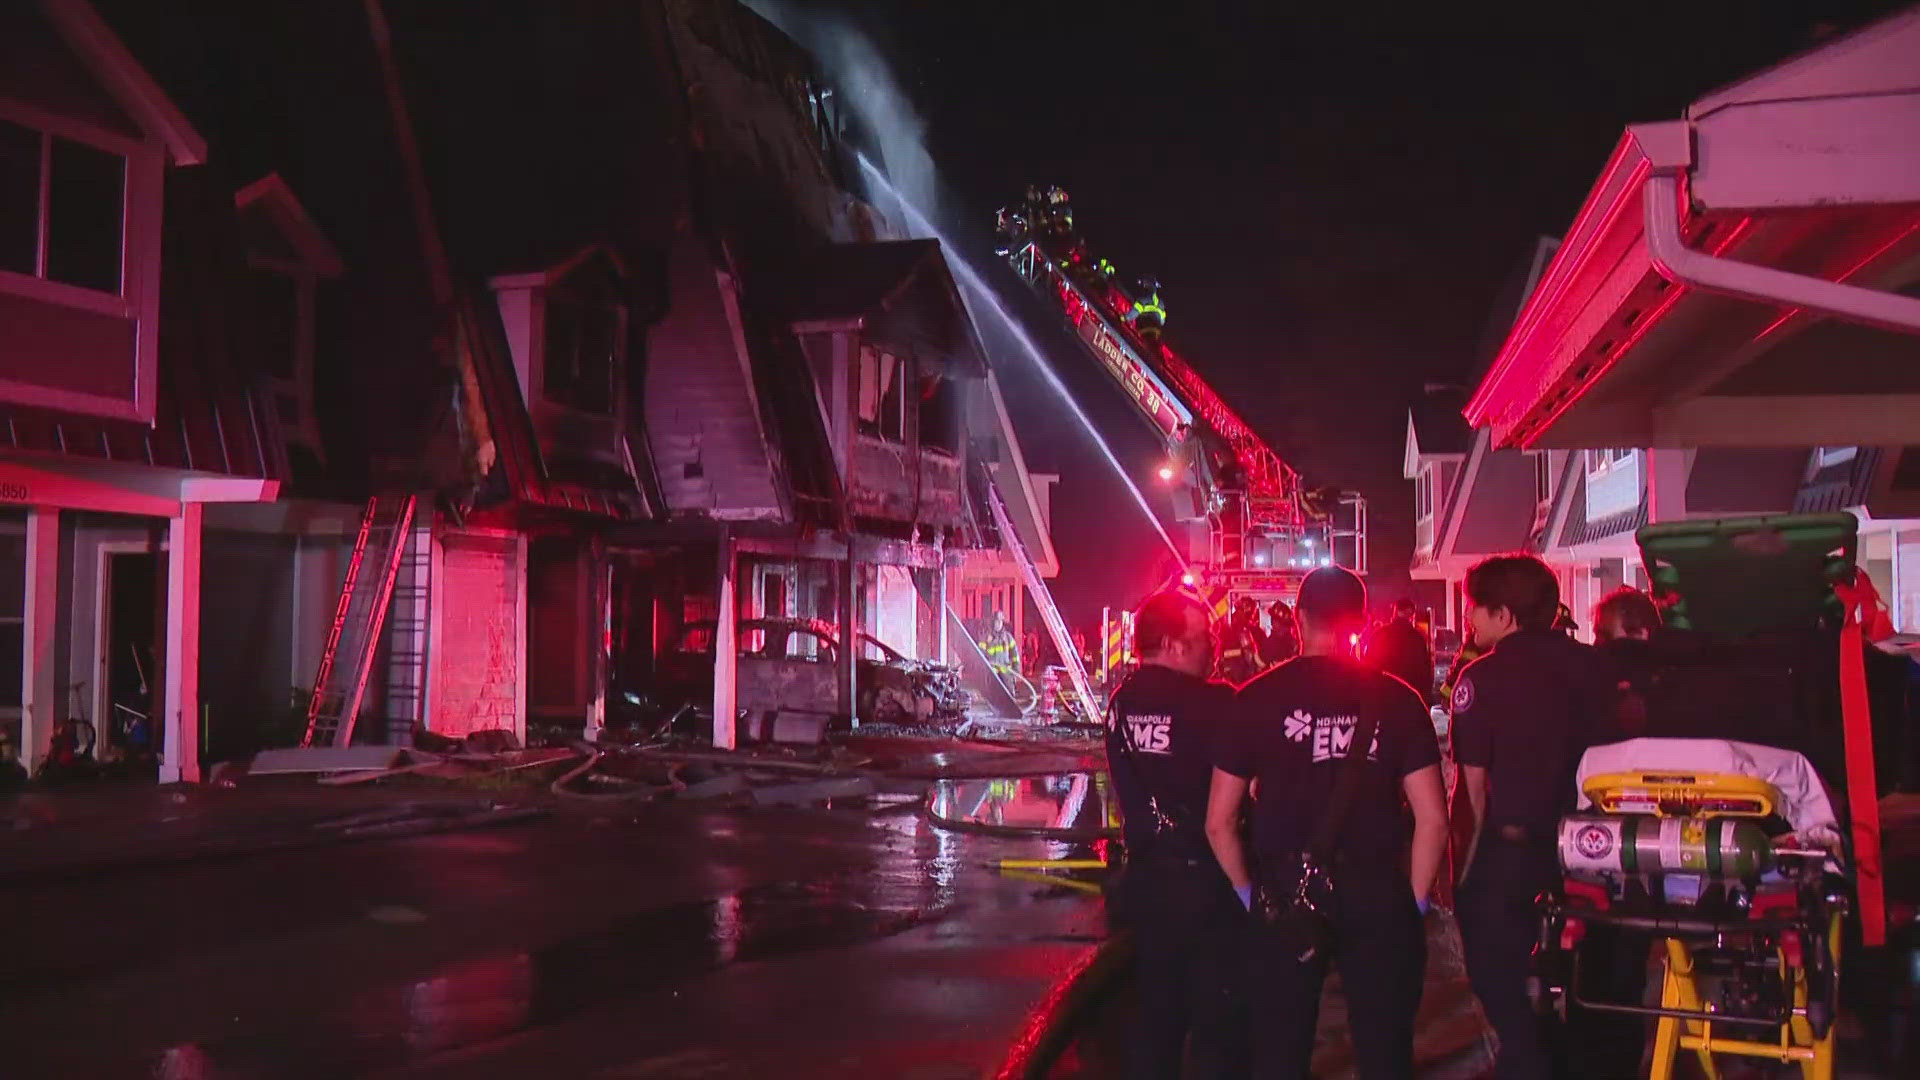 The fire was reported around 2:45 a.m. Tuesday near East 56th Street and I-465.